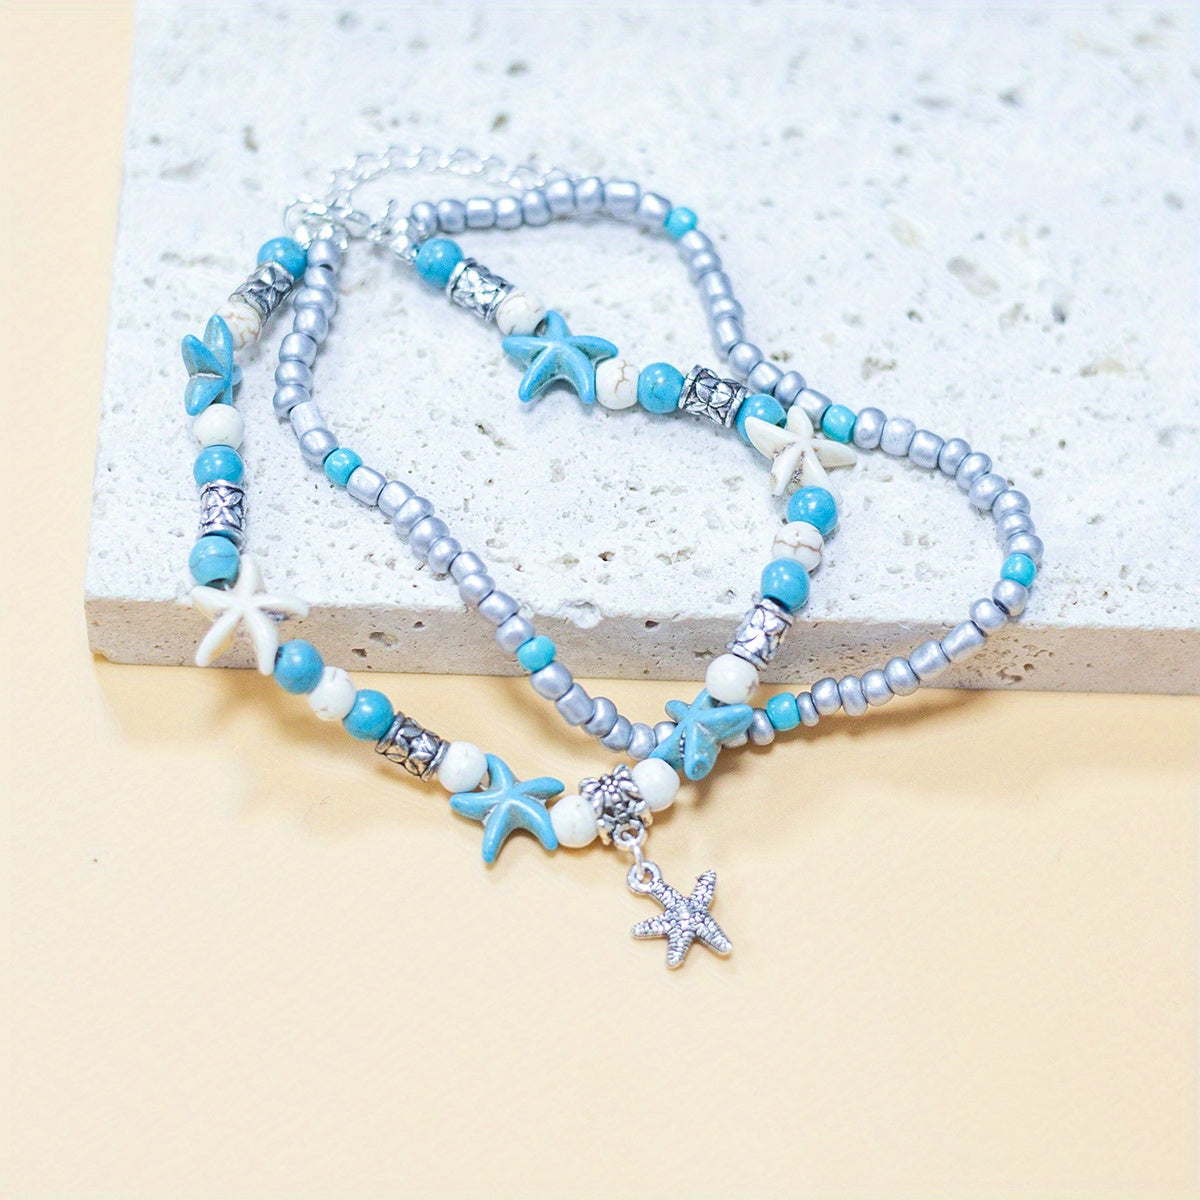 Add a Touch of Beachy Charm with our Colorful Beaded Anklet Chain - Featuring Starfish and Turtle Charms, Adjustable Size, Perfect for Women and Girls